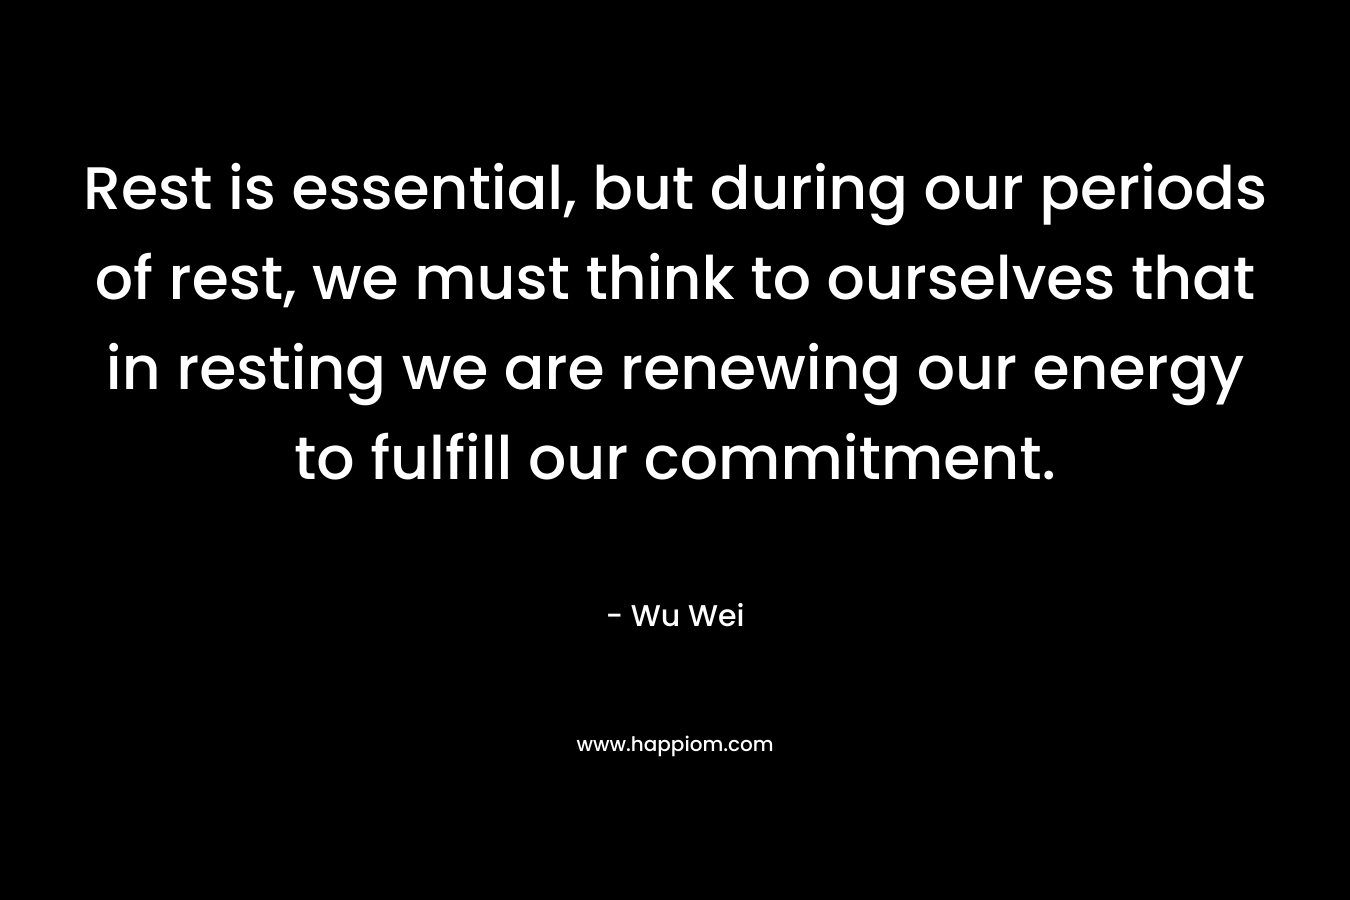 Rest is essential, but during our periods of rest, we must think to ourselves that in resting we are renewing our energy to fulfill our commitment. – Wu Wei